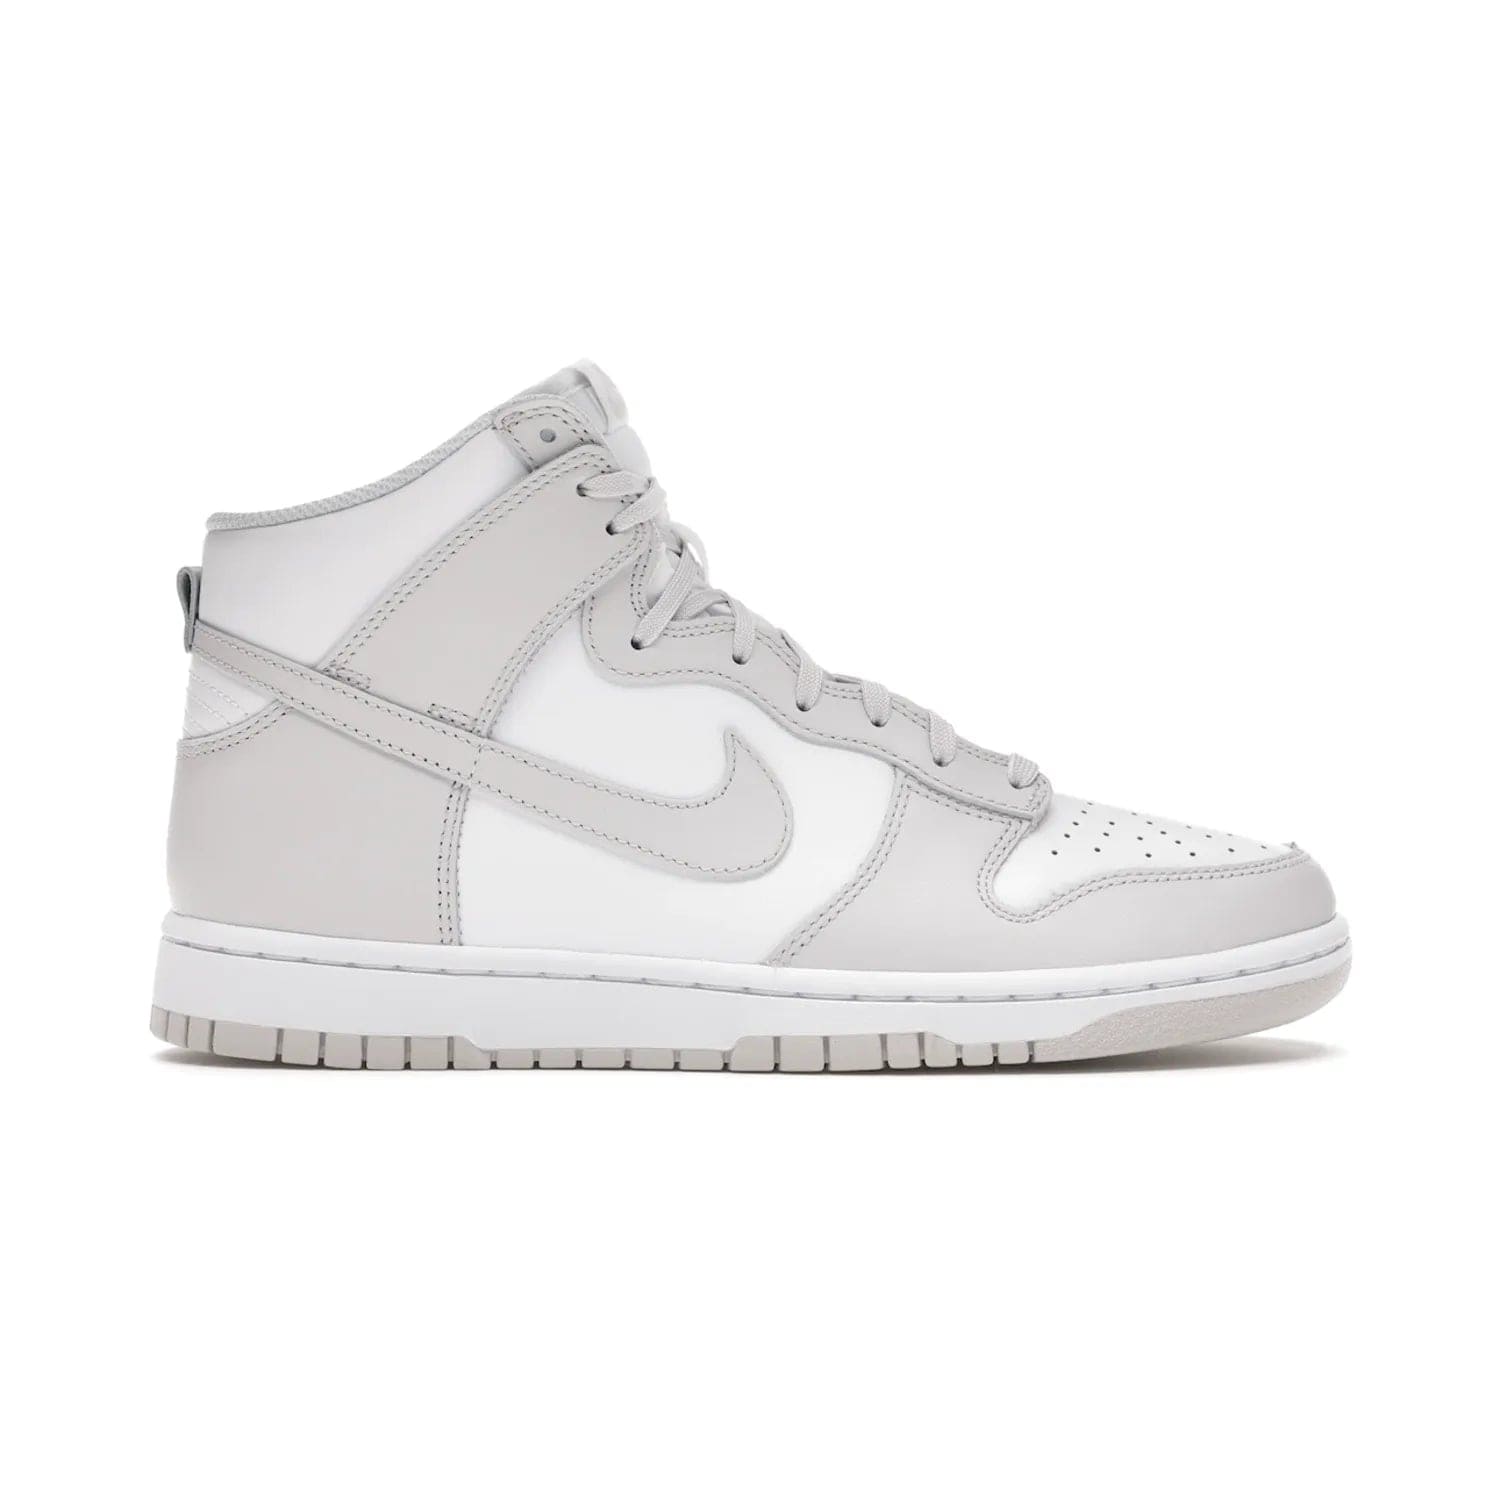 Nike Dunk High Retro White Vast Grey (2021) - Image 1 - Only at www.BallersClubKickz.com - Nike Dunk High Retro White Vast Grey 2021: classic '80s basketball sneaker with a crisp white base, grey overlays, midsole tooling and outsole. Dropped Feb. 2021.